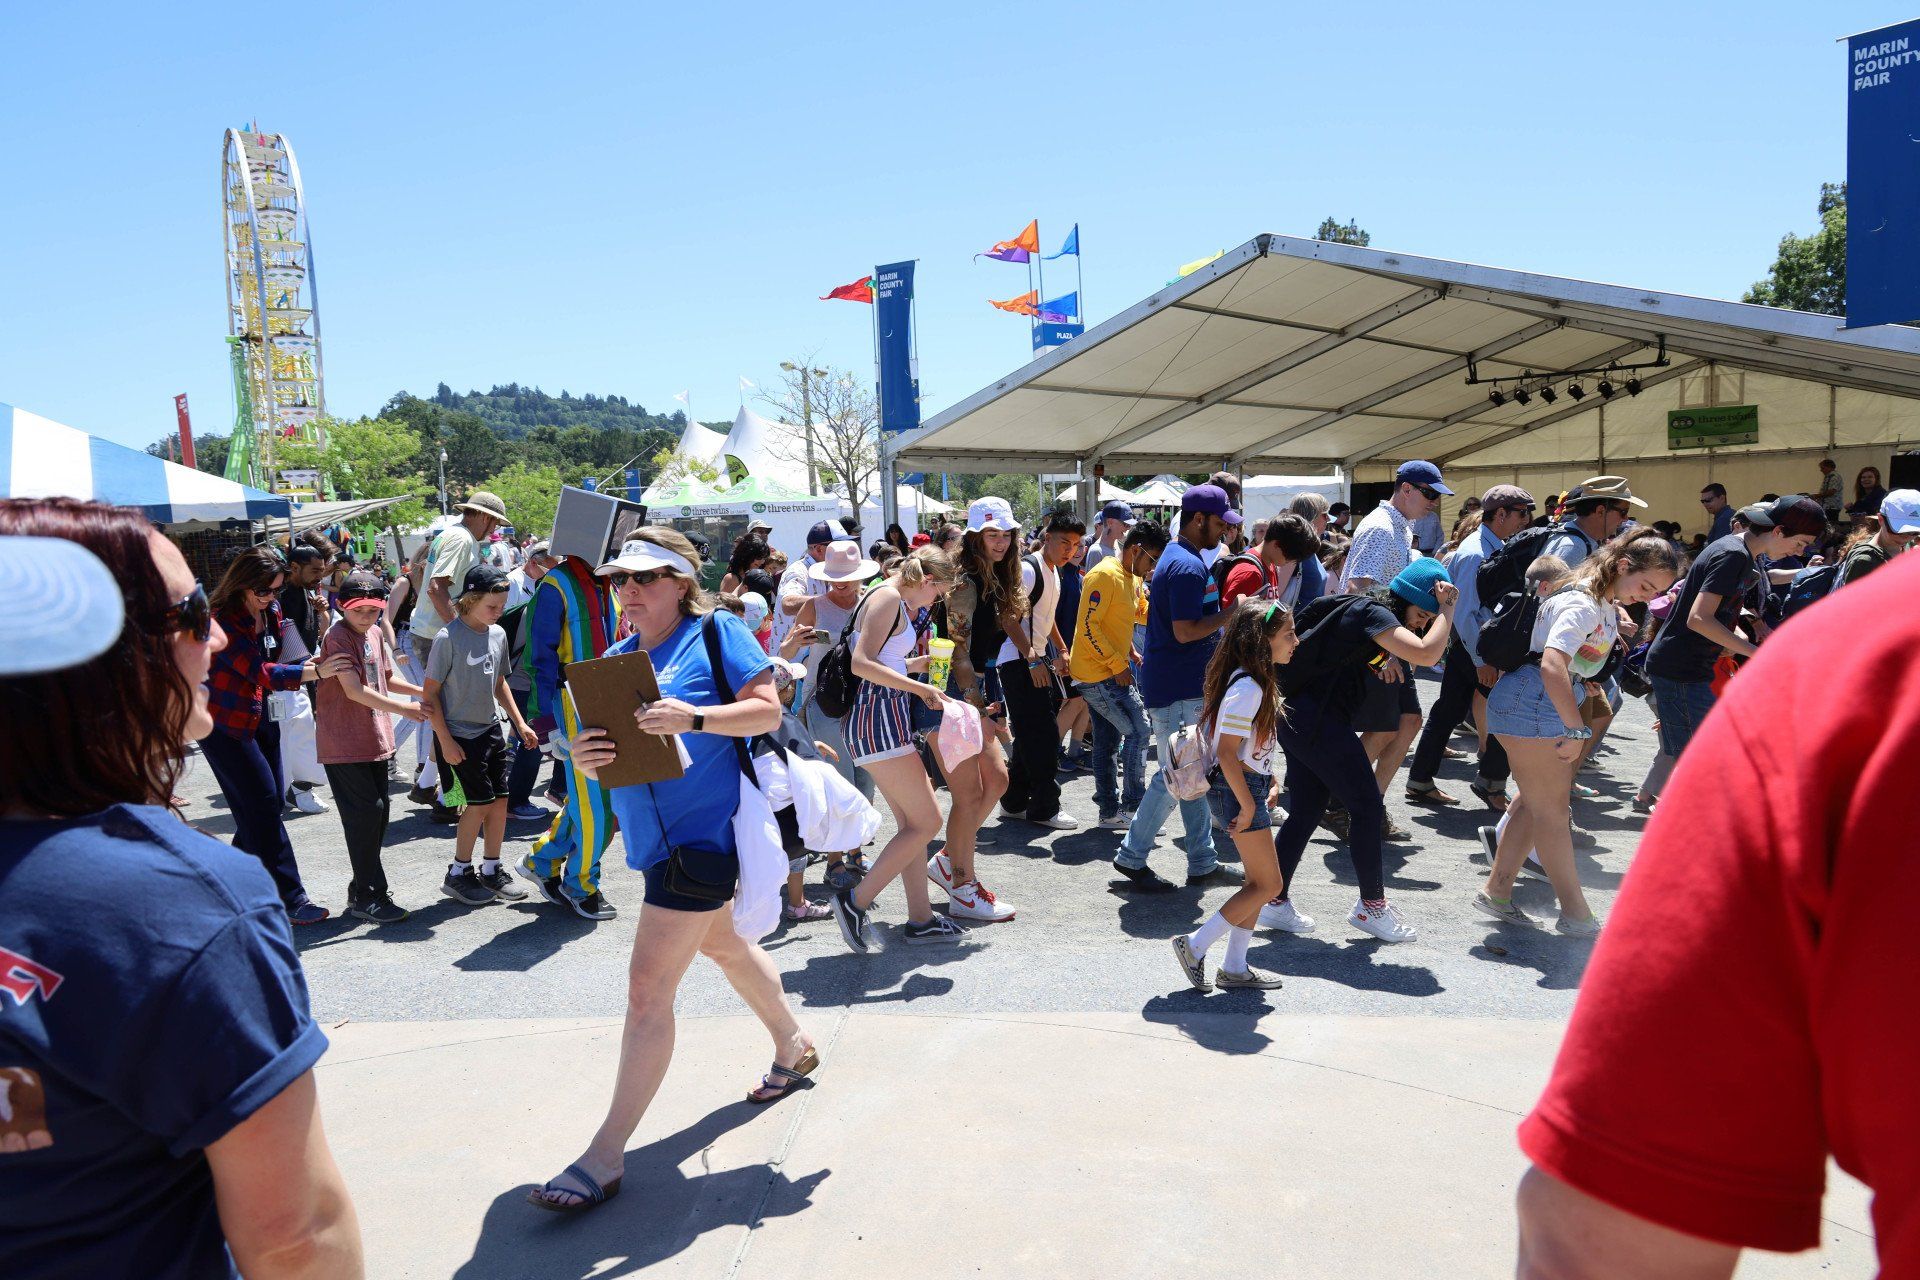 A total of 180 people celebrated the 50th Anniversary of the Apollo 11 moon landing  by doing the Moon Walk dance at the Marin County Fair on July 3rd, 2019, during an event organized by the Space Station Museum, thus setting the new world record for the Largest Moon Walk Dance, according to the World Record Academy.